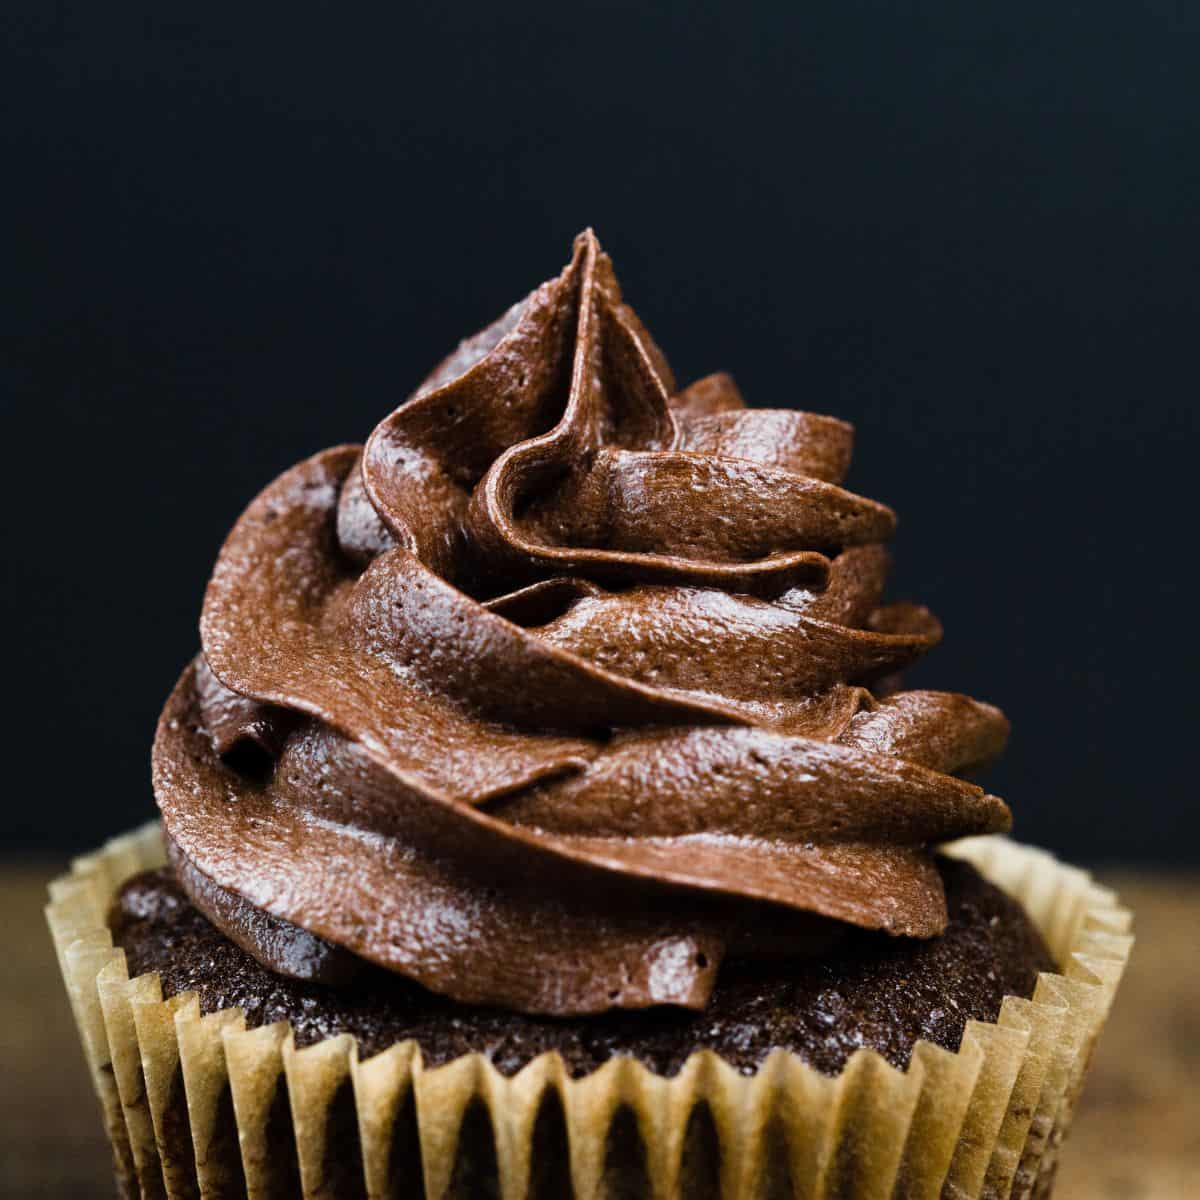 close up of a swirl of chocolate frosting on a chocolate cupcake in front of a black background so it looks like the frosting is in the spotlight